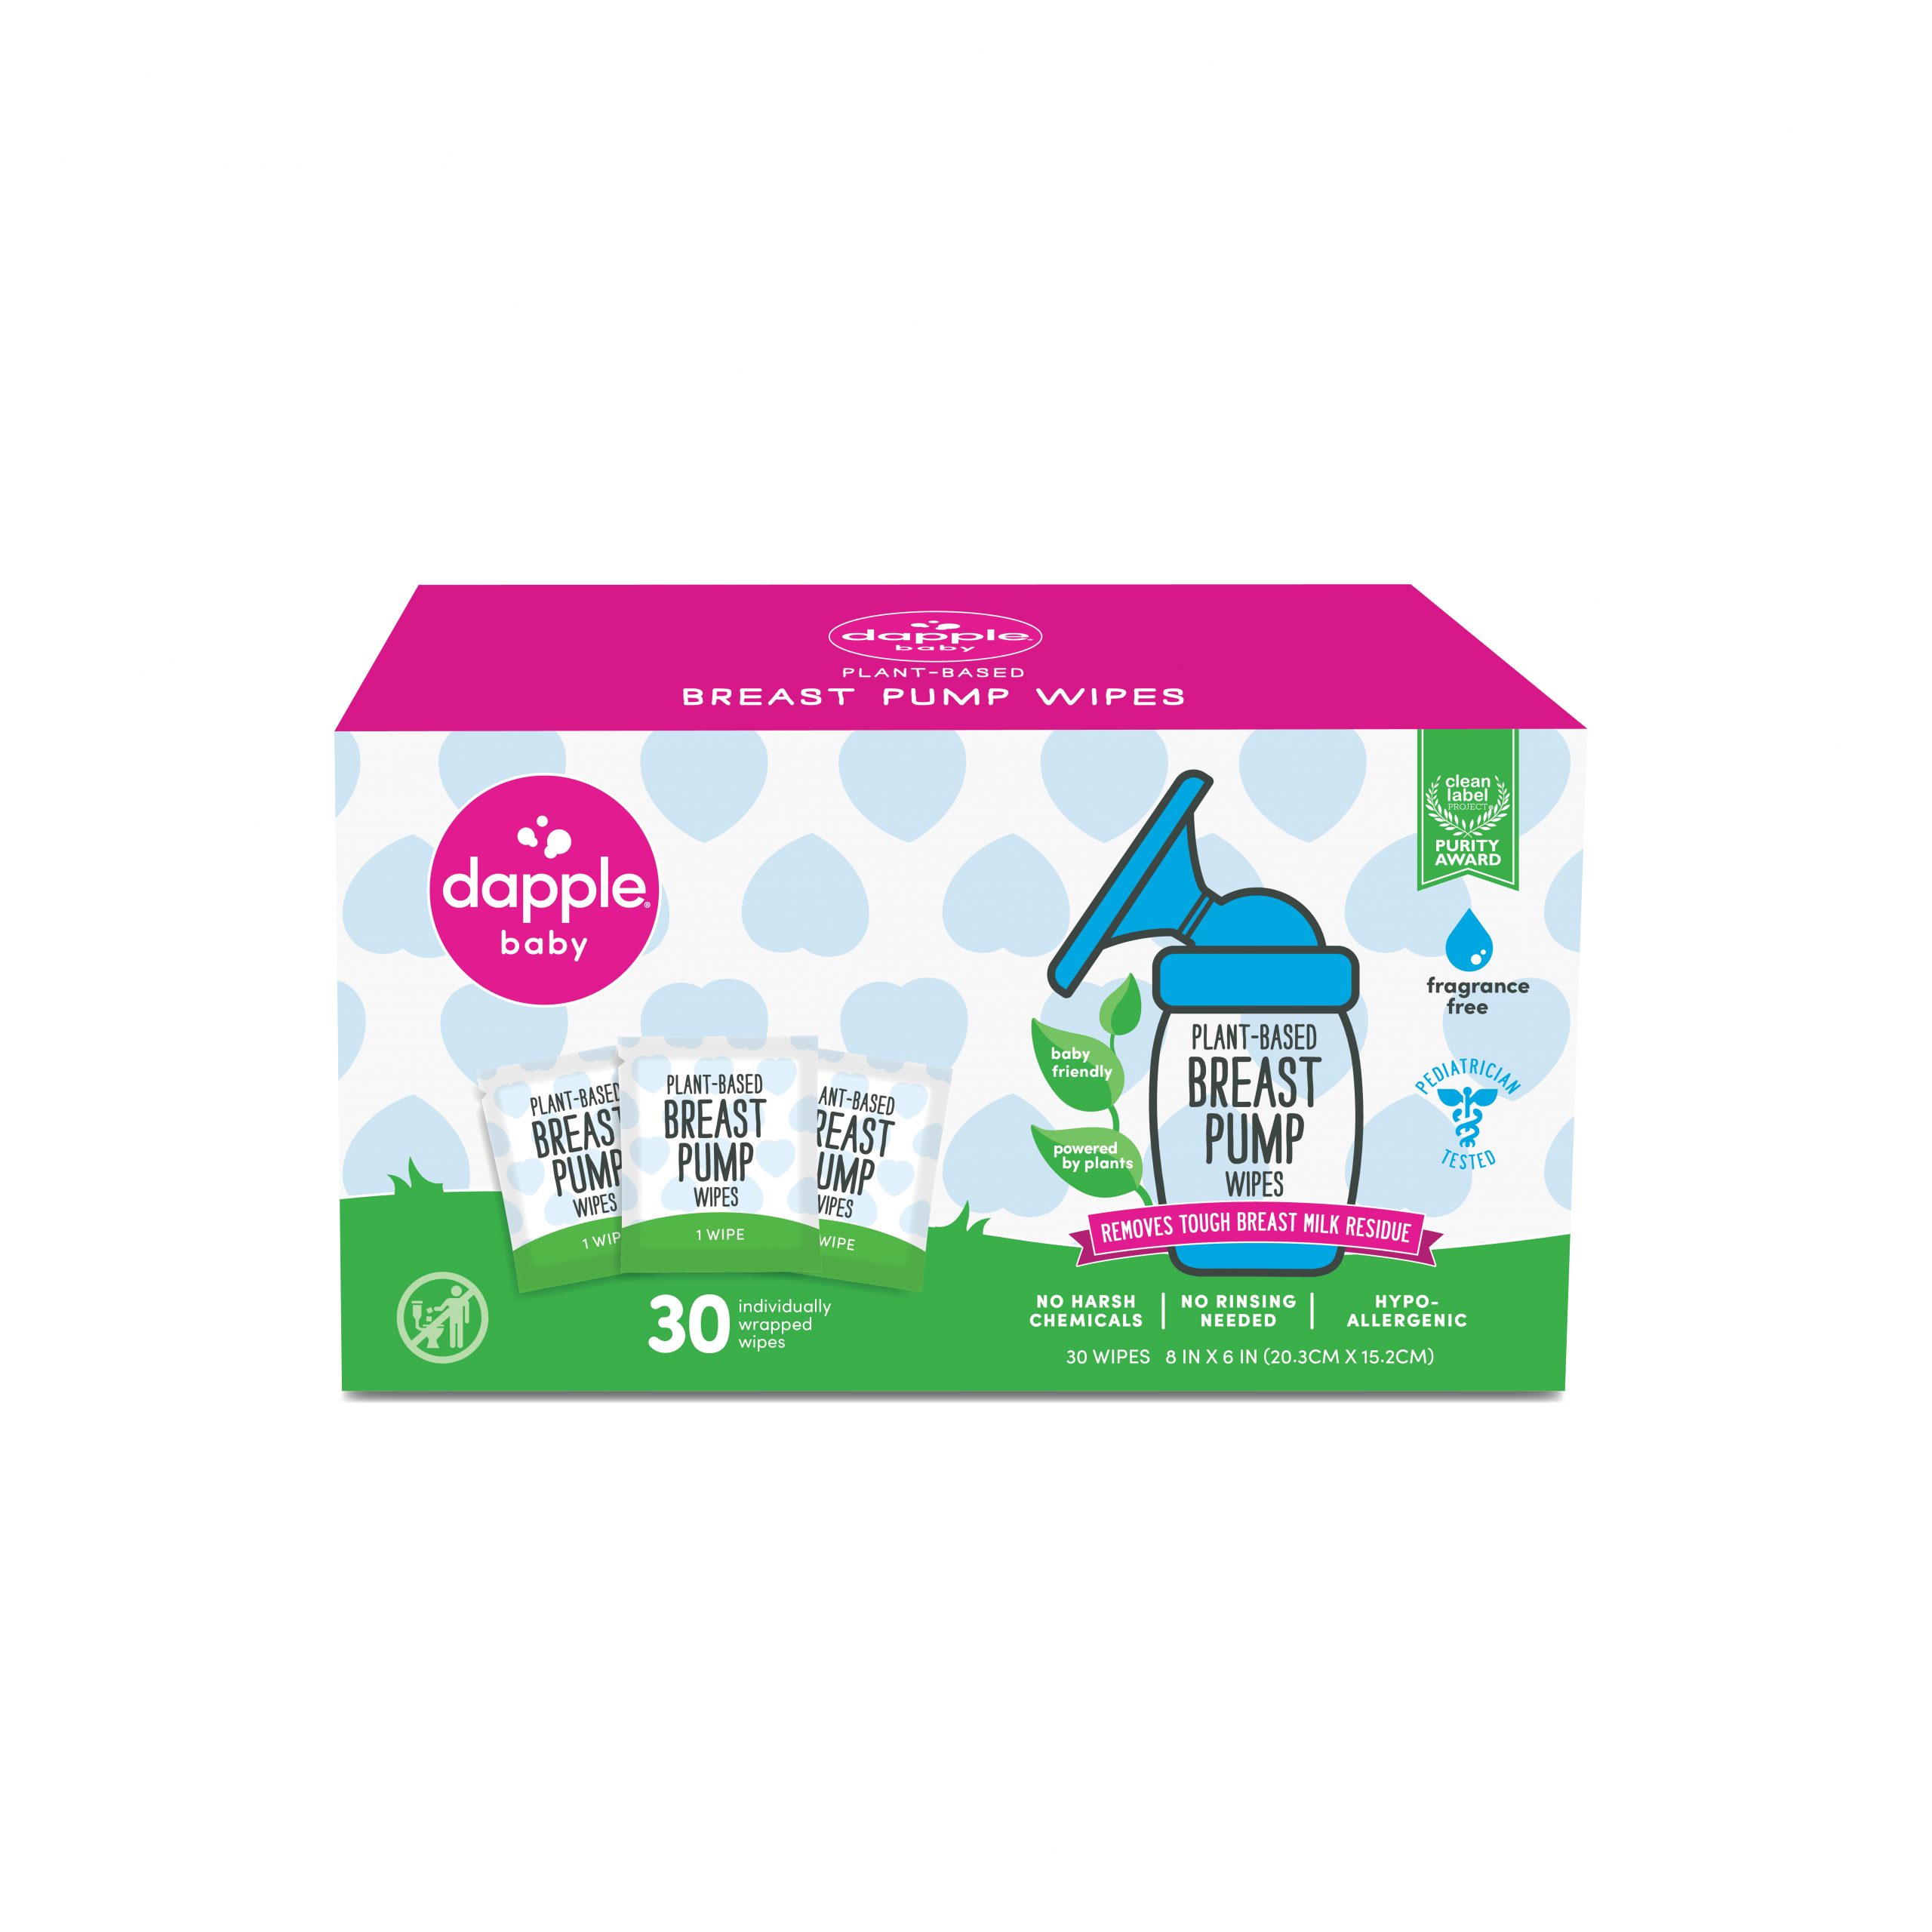 Dapple Baby - Dapple's breast pump wipes are specially designed to remove  tough breast milk residue and deep clean breast pump parts and accessories  with no harsh chemicals and easy rinsing. Toss